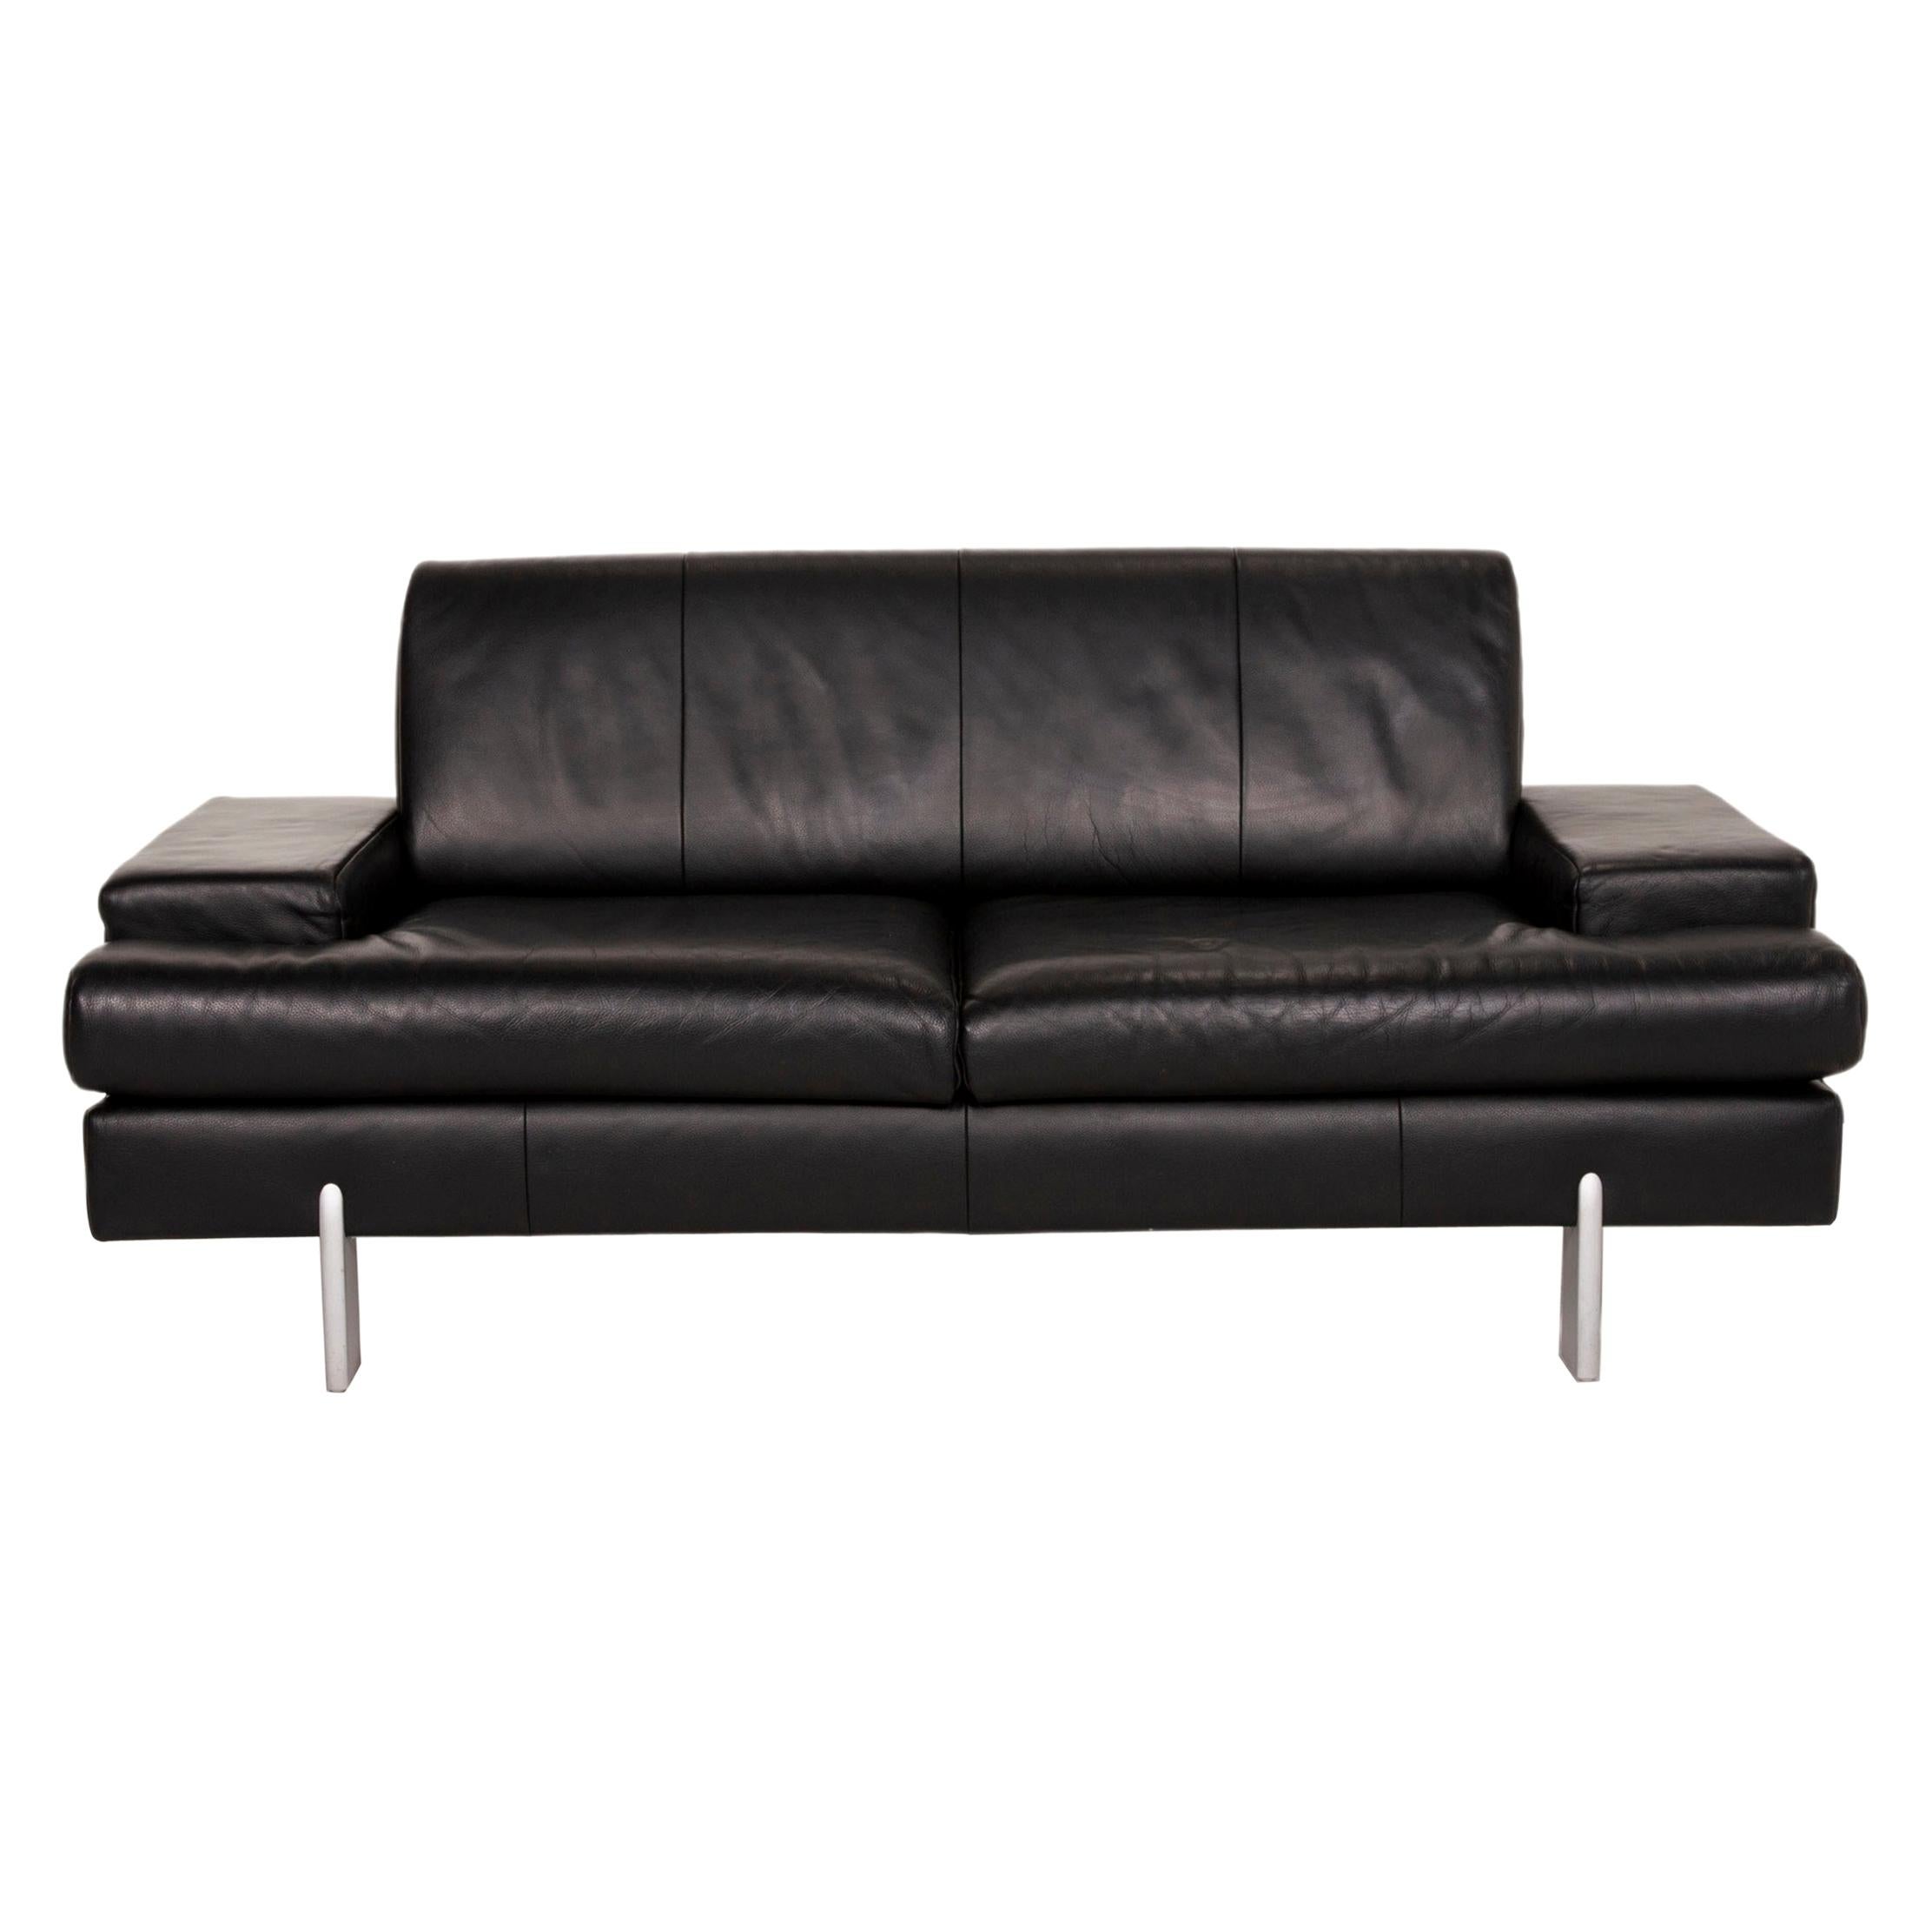 Rolf Benz AK 644 Leather Sofa Black Two-Seater Couch